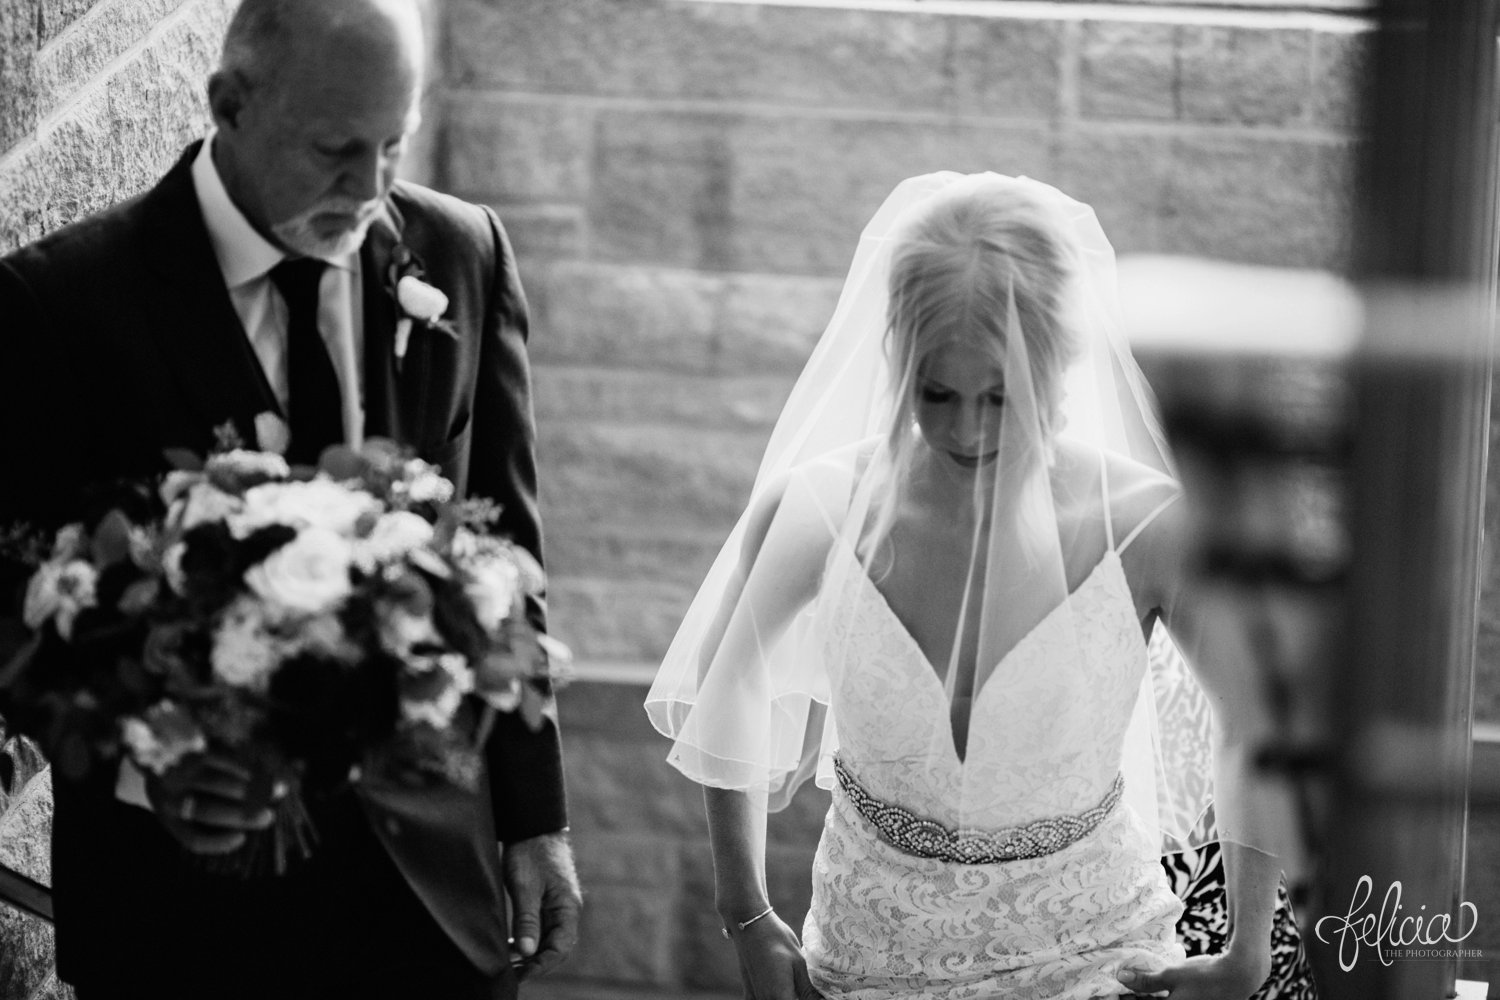 images by feliciathephotographer.com | destination wedding photographer | kansas city | ceremony | family | walking down the aisle | black and white | st charles borromeo | father of the bride | veil | lace dress | 